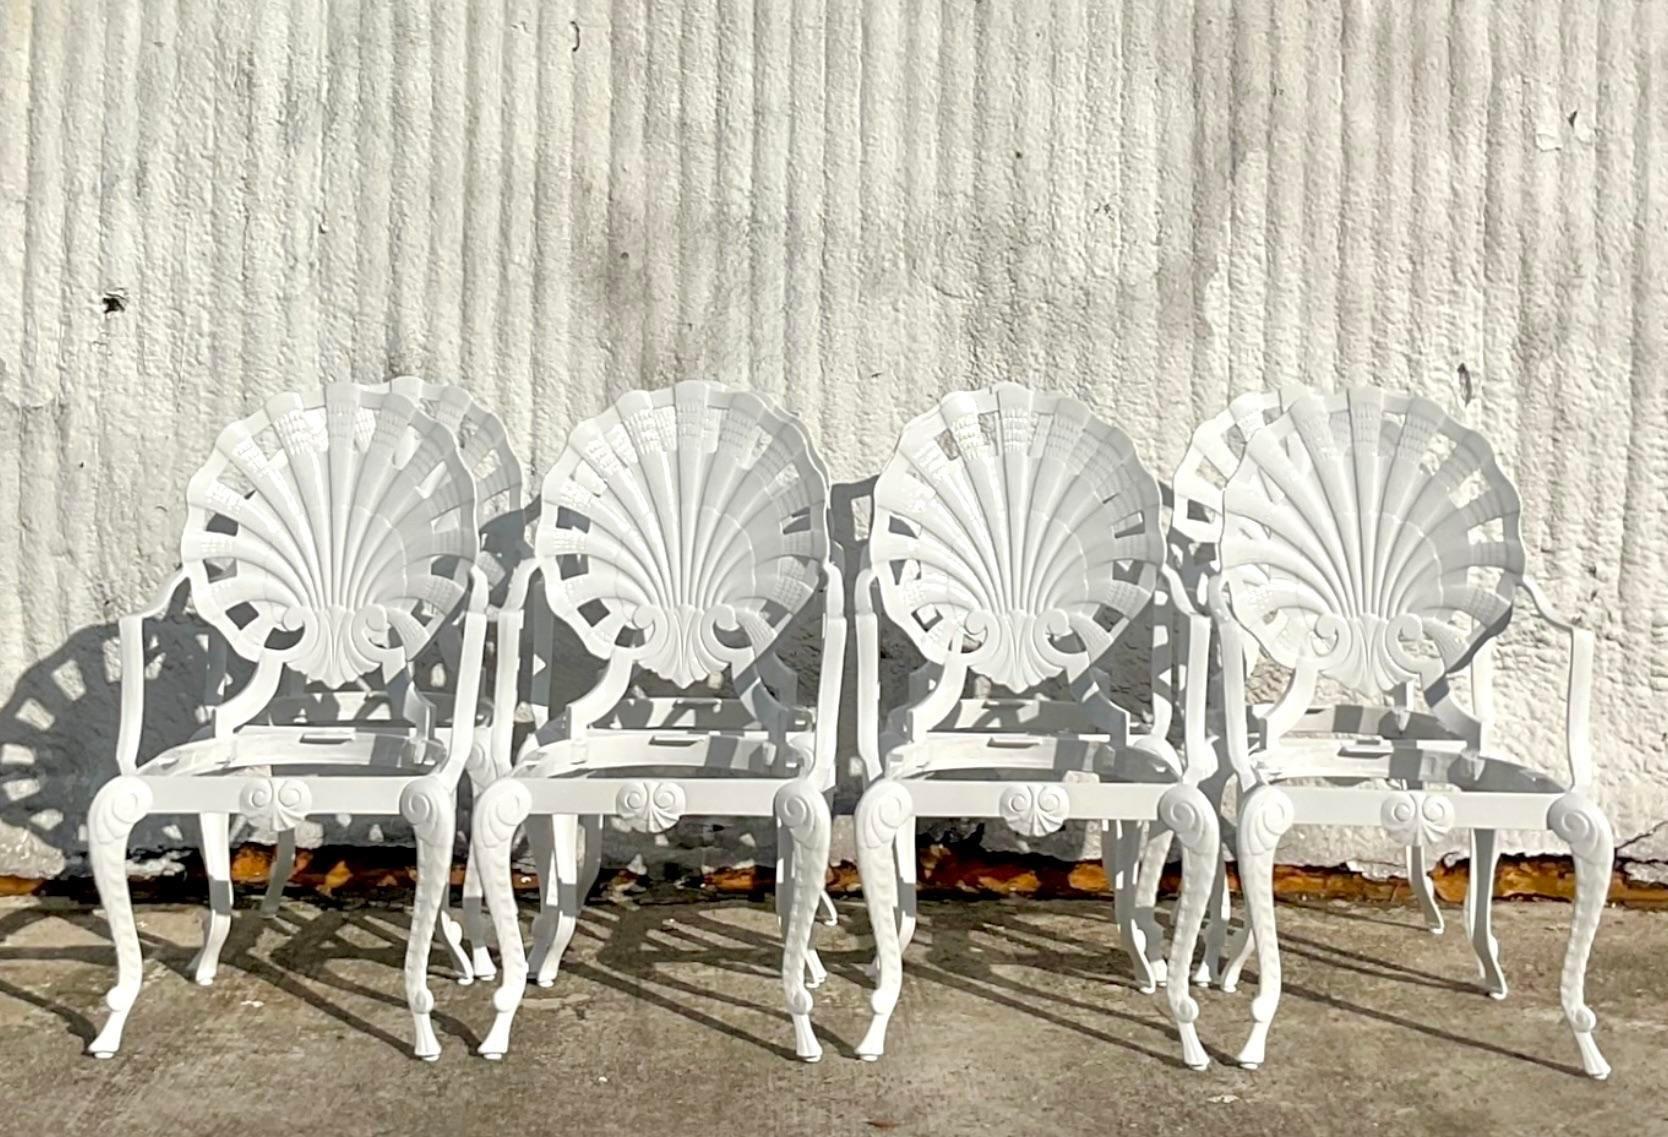 A fabulous set of 8 vintage coastal outdoor dining chairs. Done in the manner of a Brown Jordan The iconic Grotto chairs in the classic shell design. Fully restored with all new gloss white powder coating and seat panels. Fresh and ready for you to